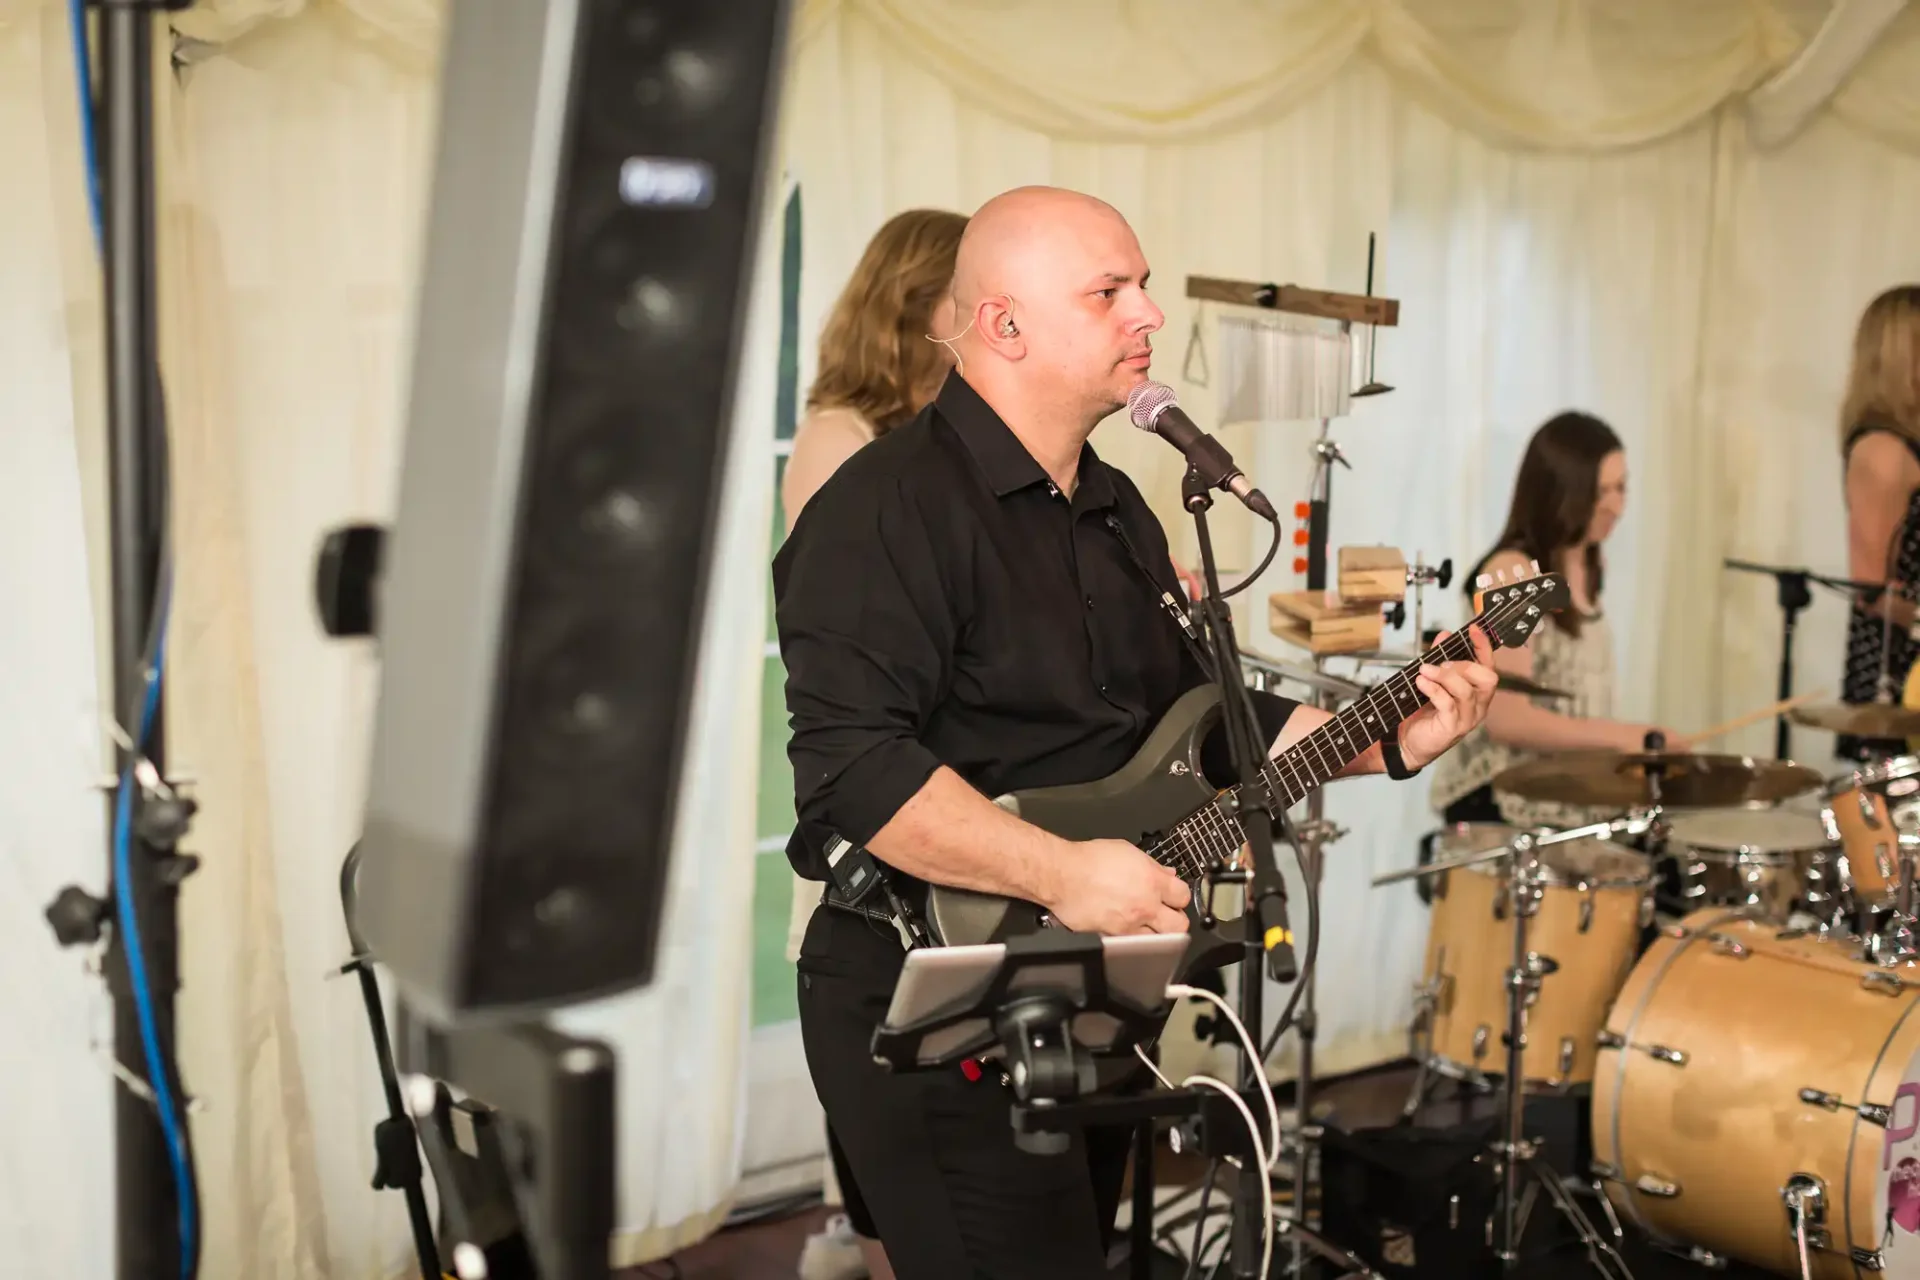 Bald musician playing electric guitar on stage at an event, with a drummer in the background.